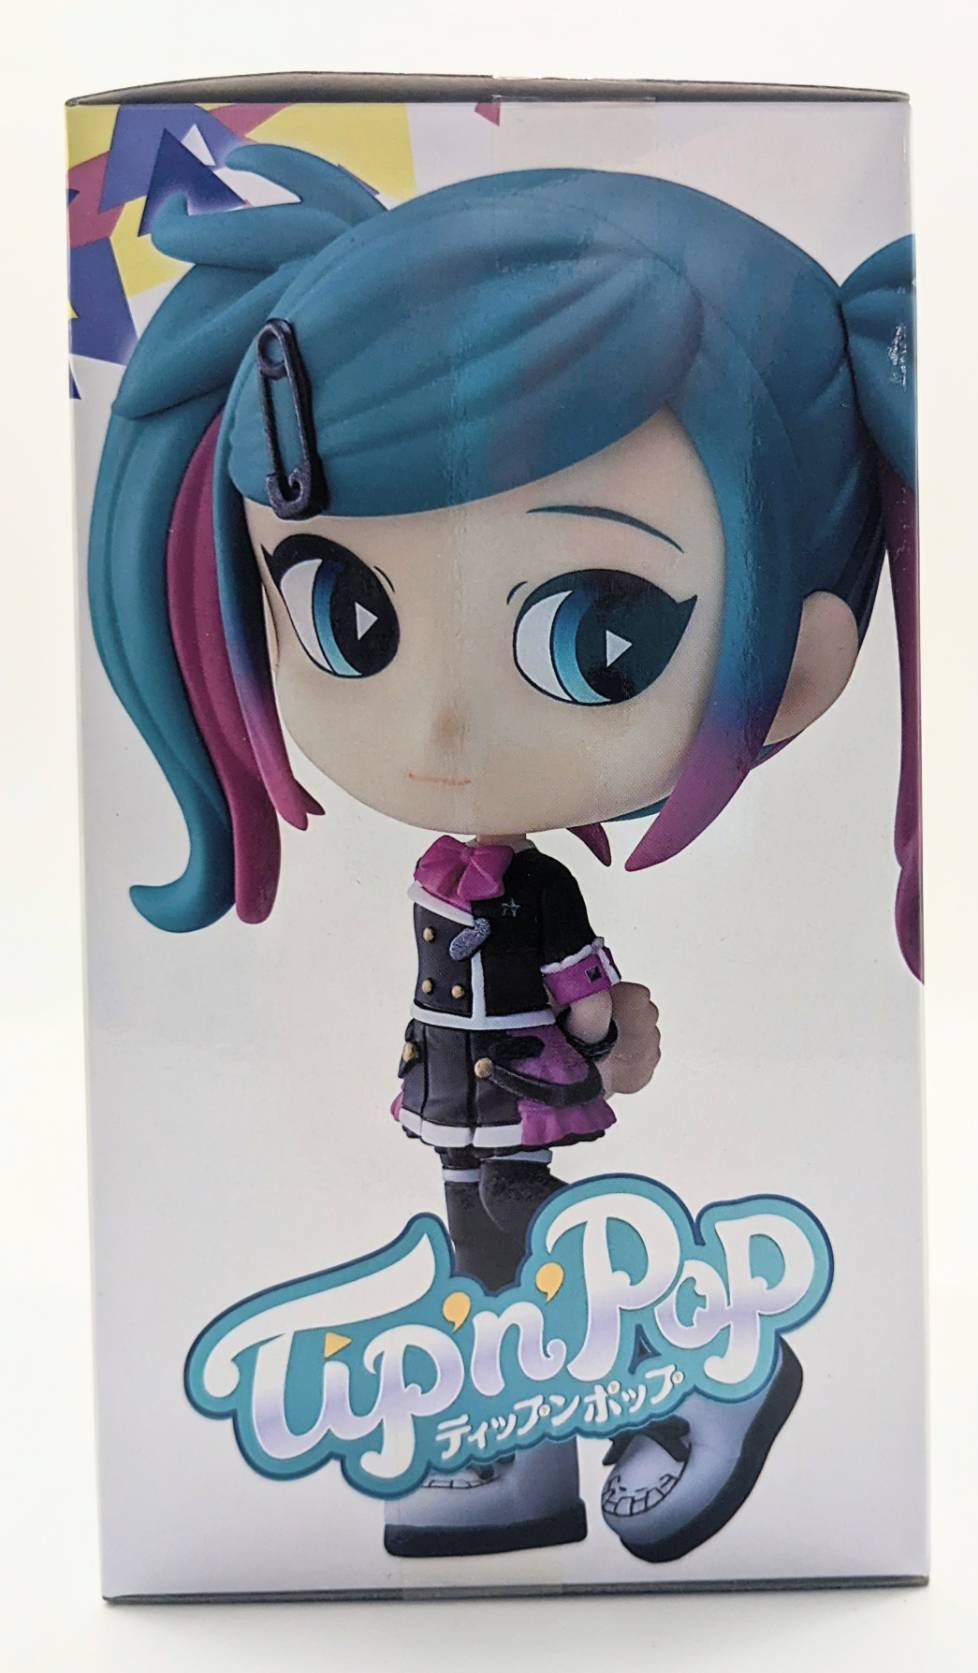 Project Sekai Colorful Stage! feat. Hatsune Miku Tip'n'Pop Premium Figure "Hatsune Miku from the Classroom World" Another Color, animota